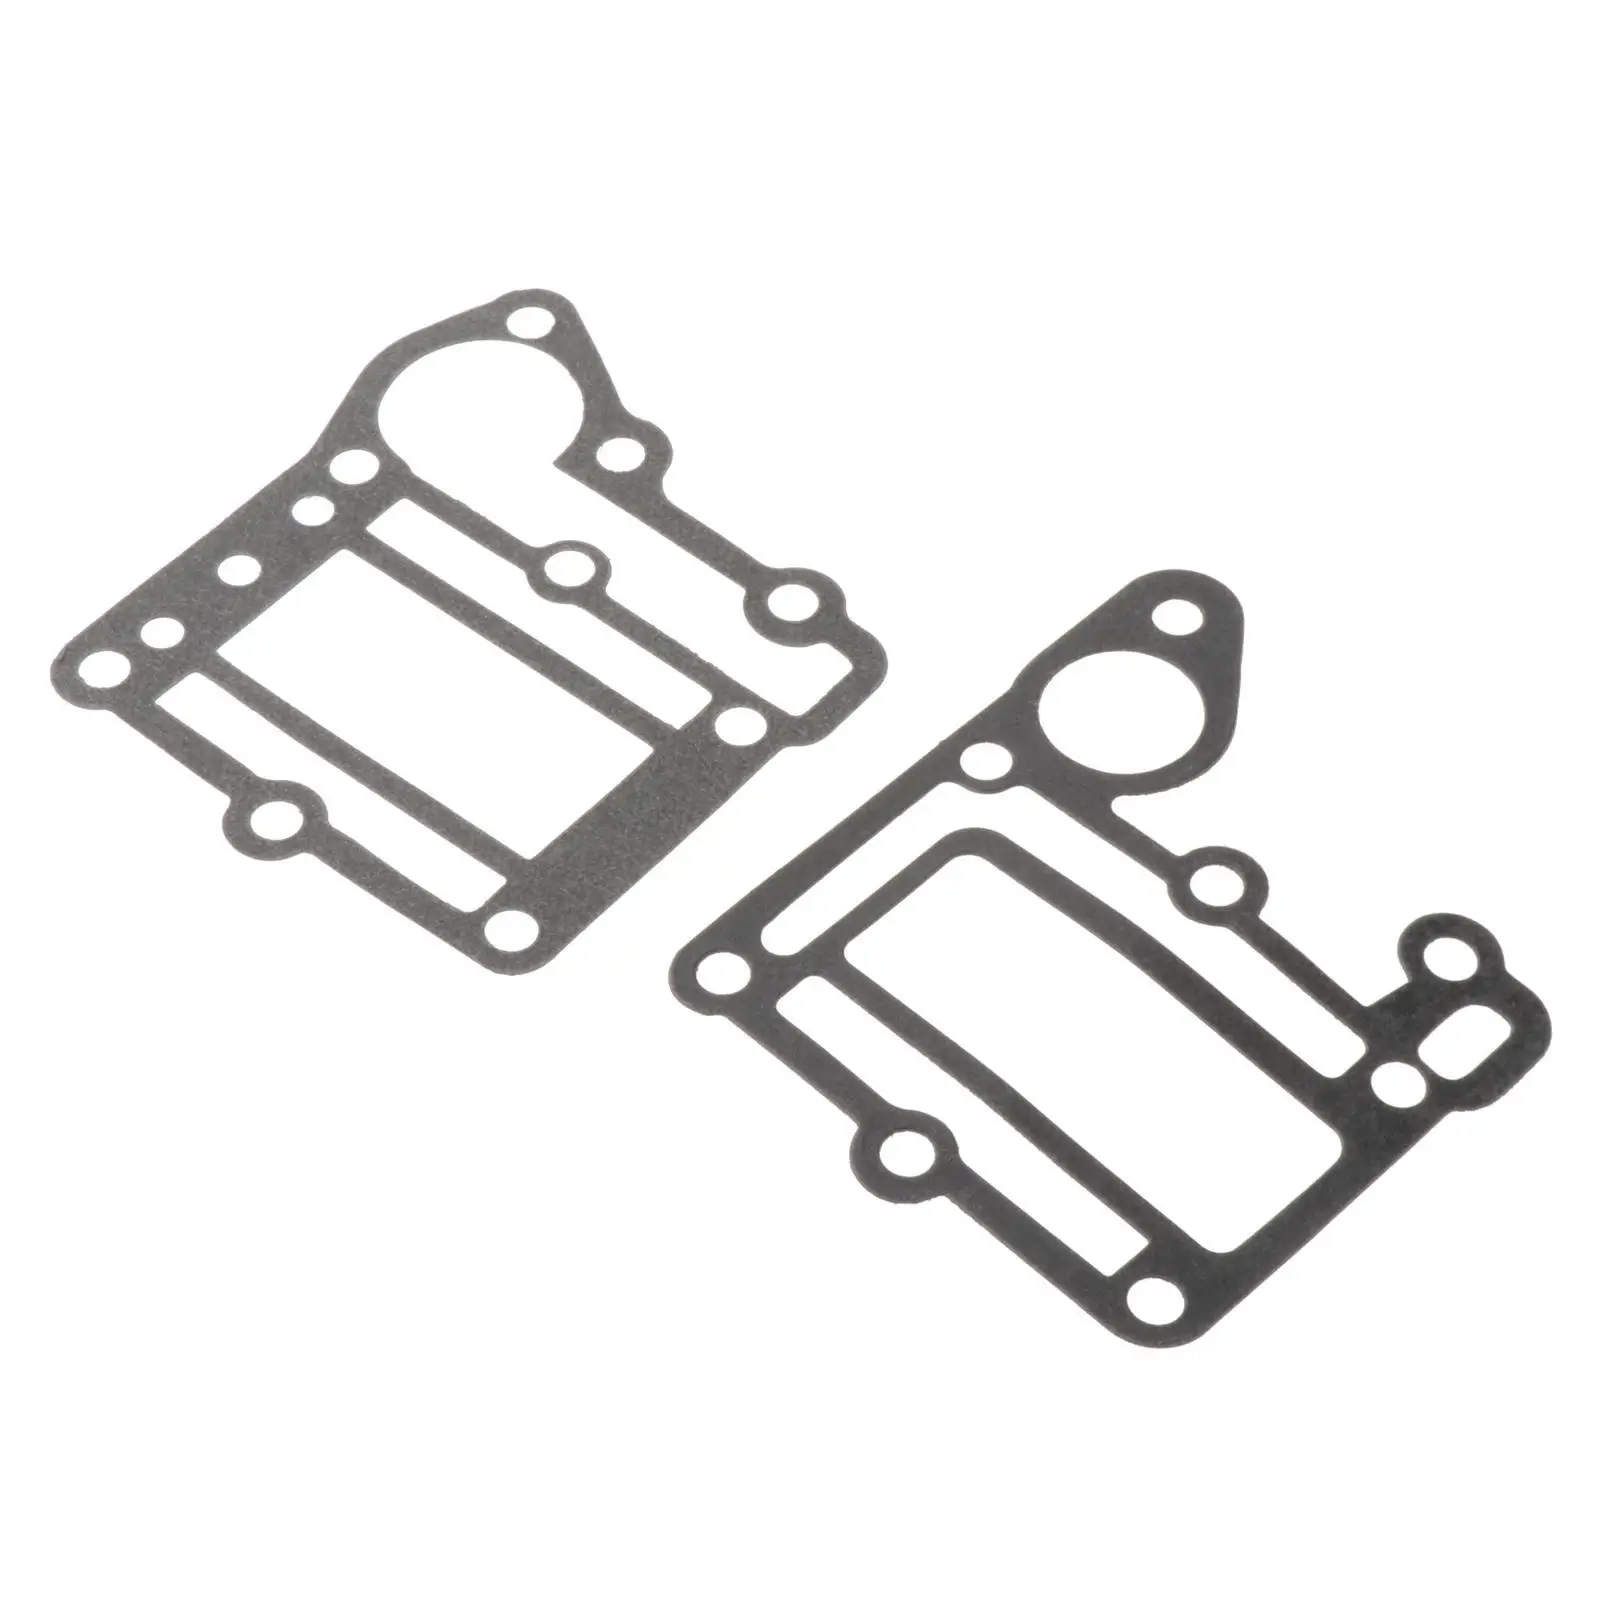 2 Pieces Exhaust Jacket Gaskets 6E0-41112-A1 6E0-41114-A0 Outboard Motors for